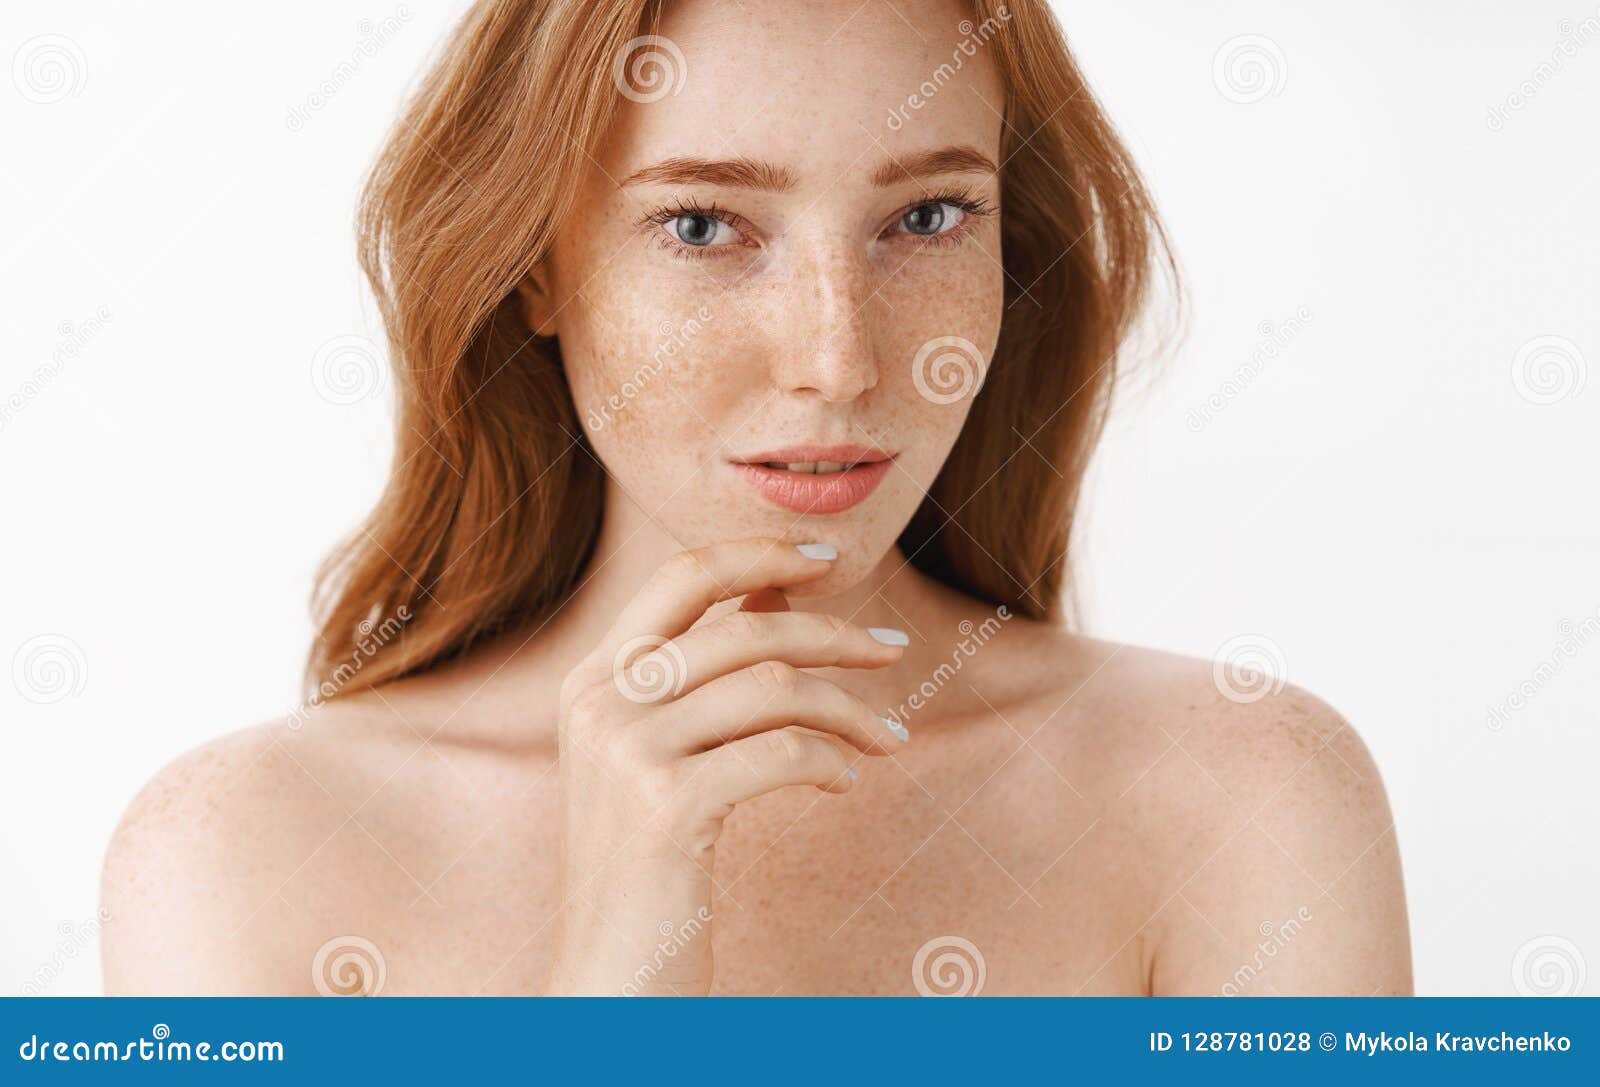 beautiful feminine and attractive woman with natural red hair and freckles on face and body touching chin gently with